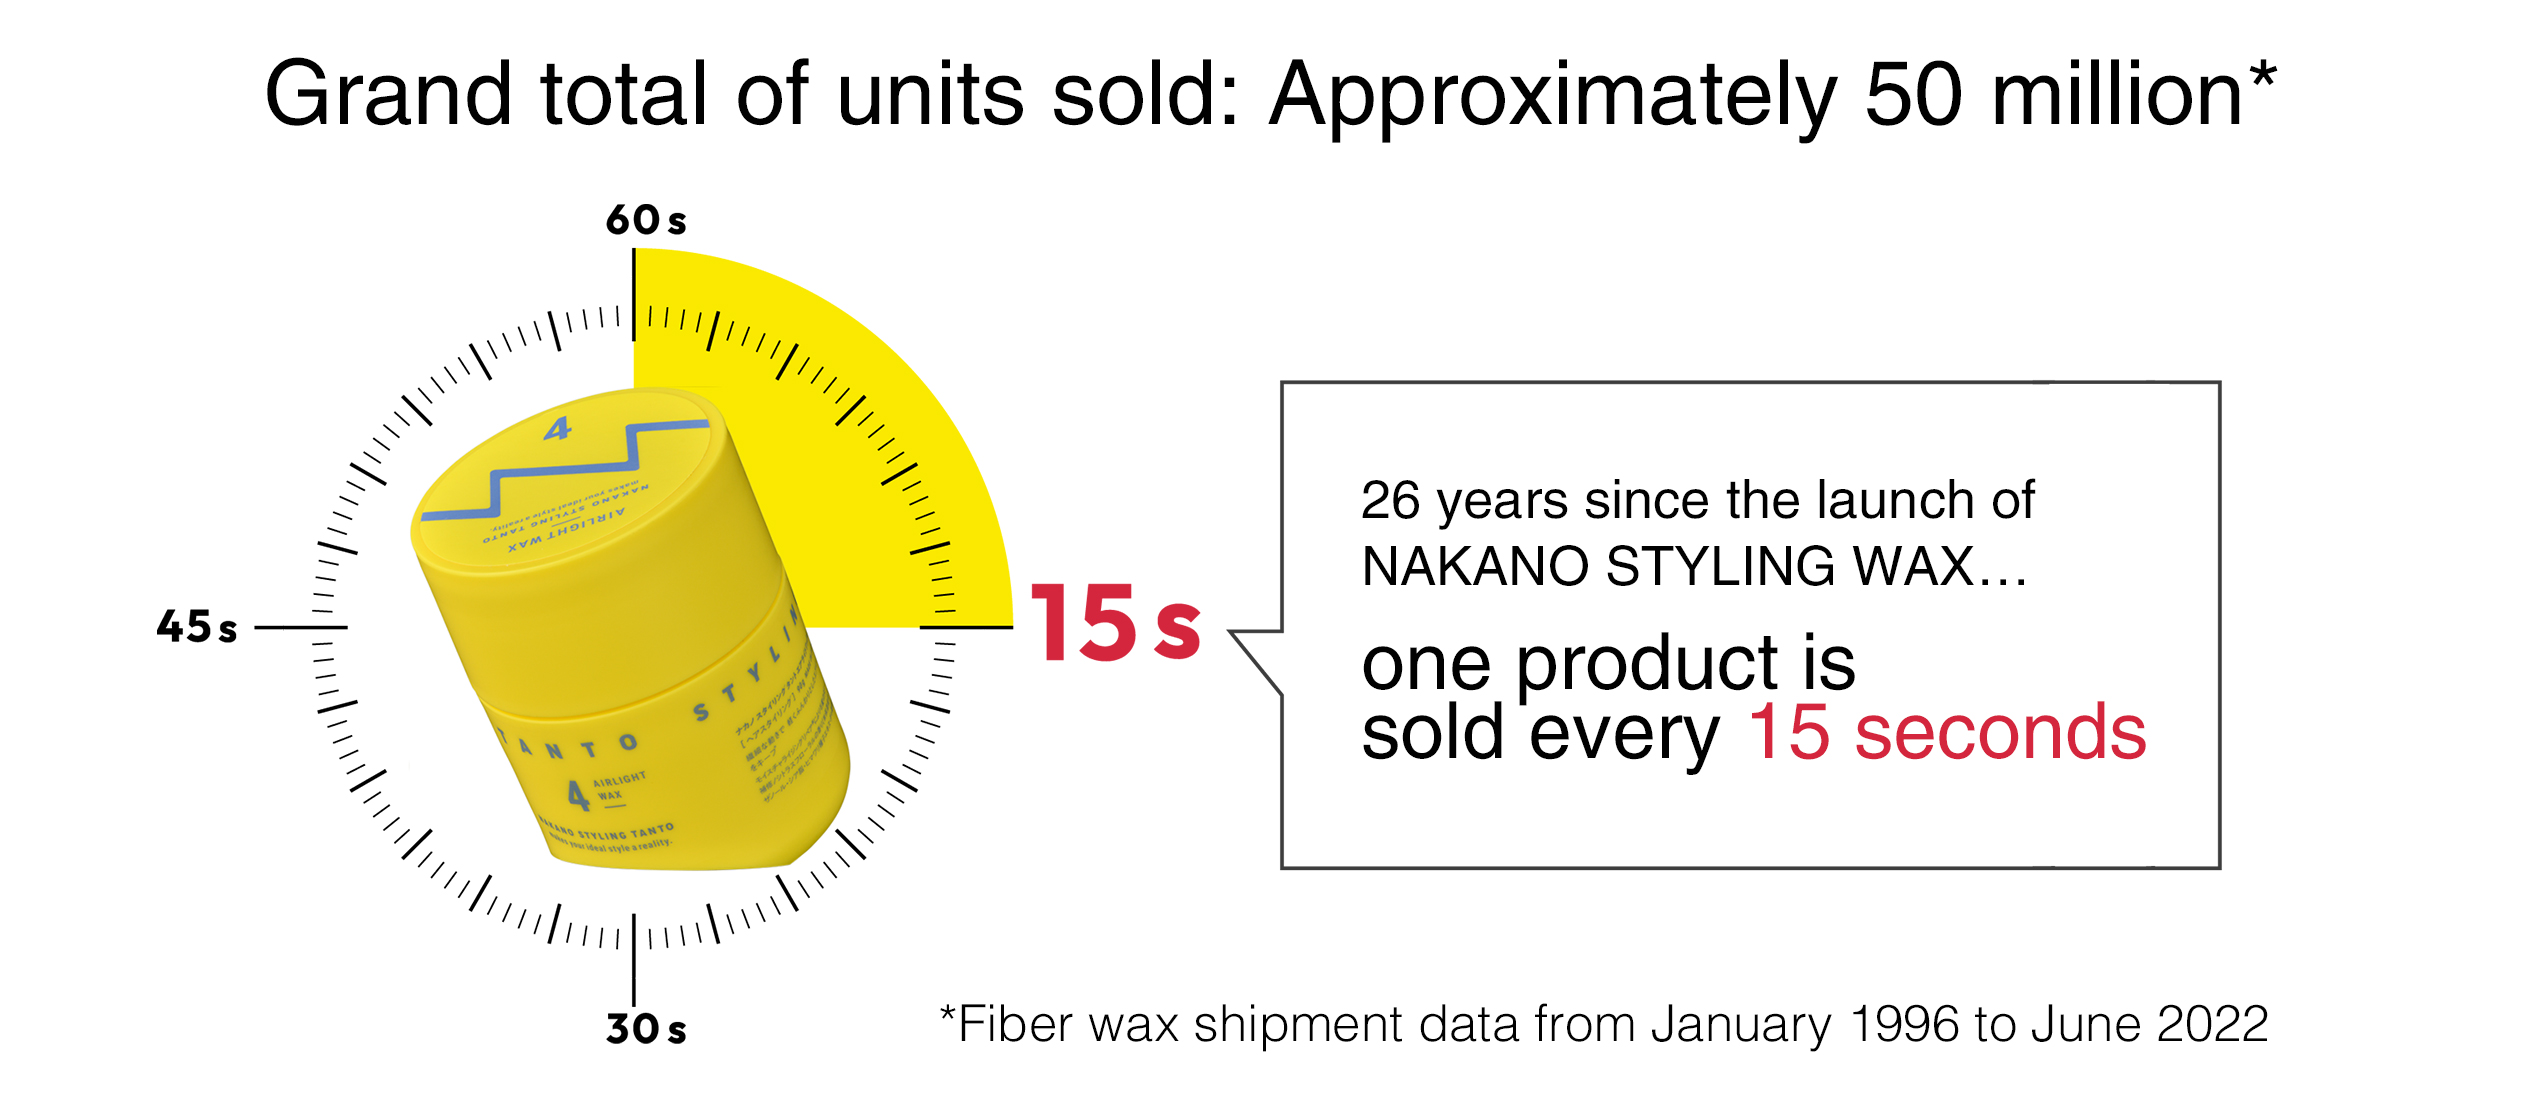 one product is<br />
sold every 15 seconds